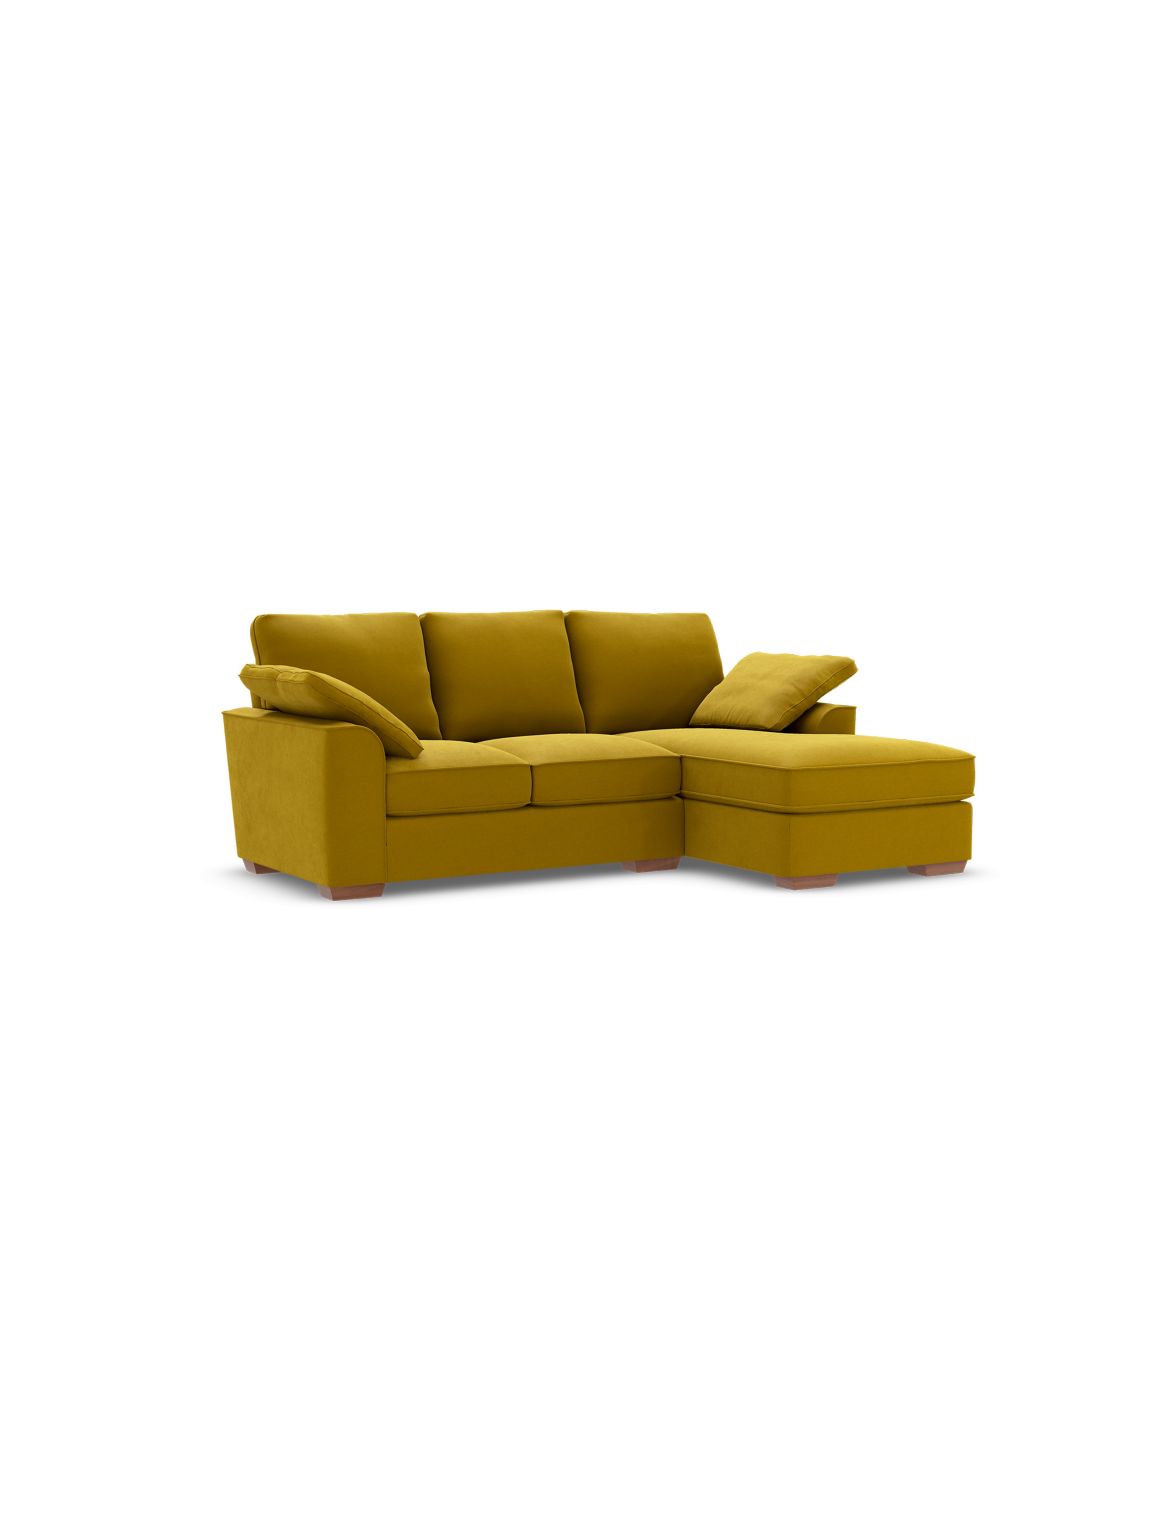 Nantucket 3 Seater Chaise (Right-Hand) yellow